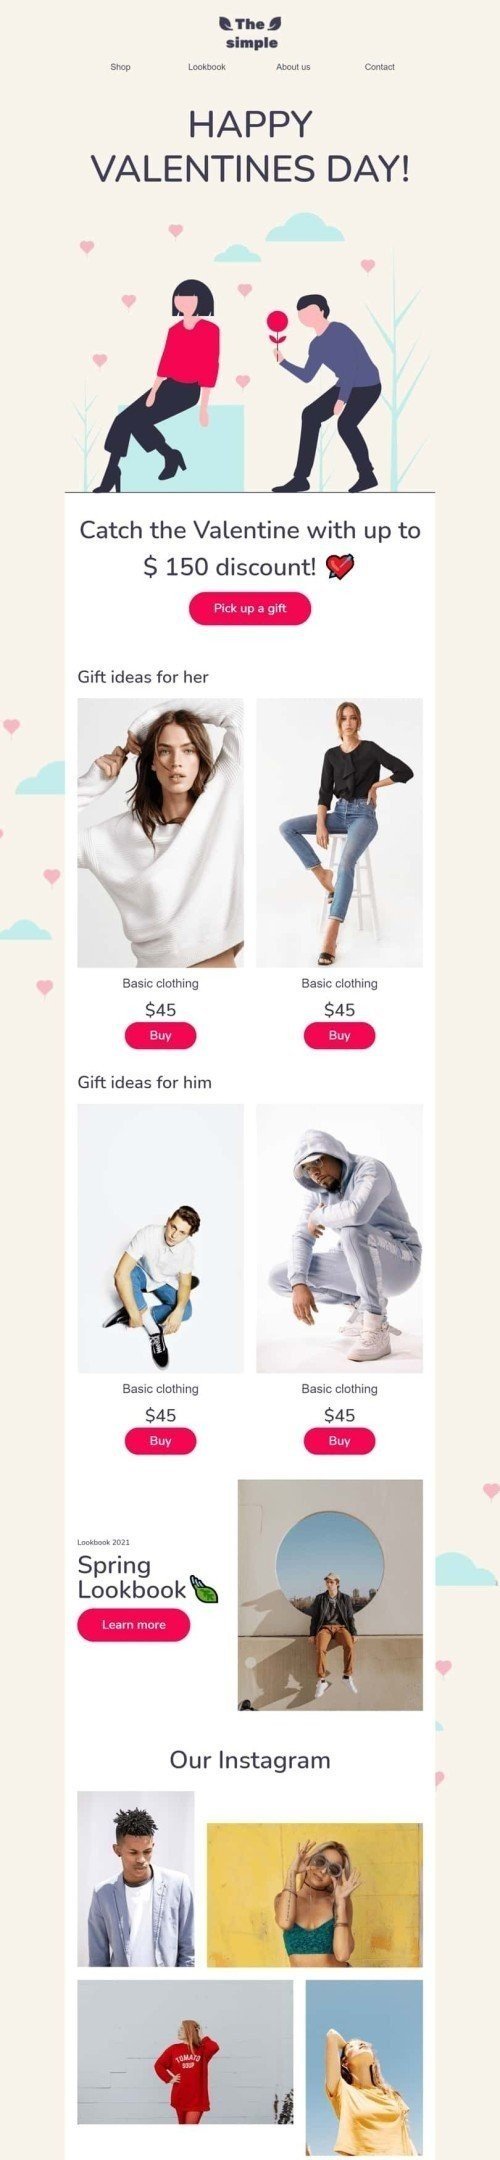 Valentine’s Day Email Template «The simple» for Fashion industry desktop view